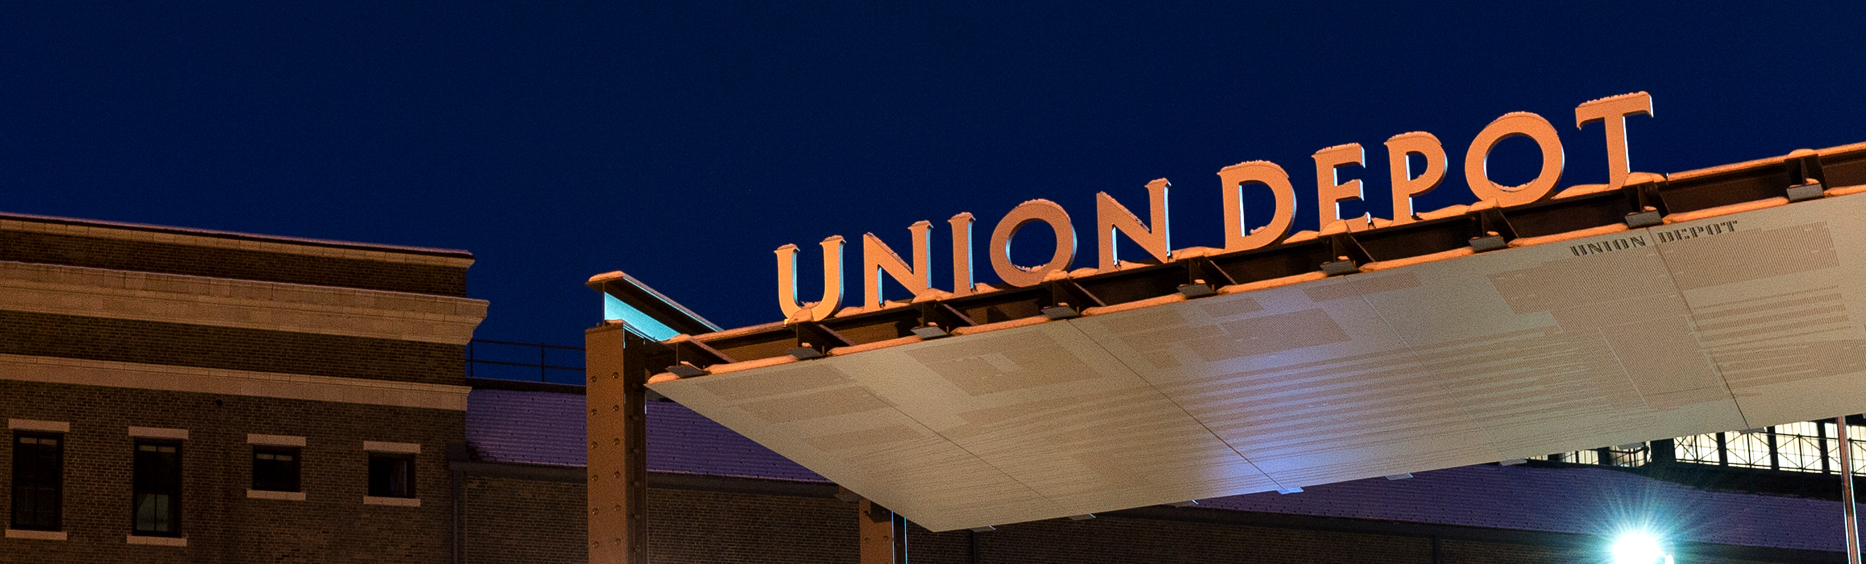 Union Depot outdoor sign